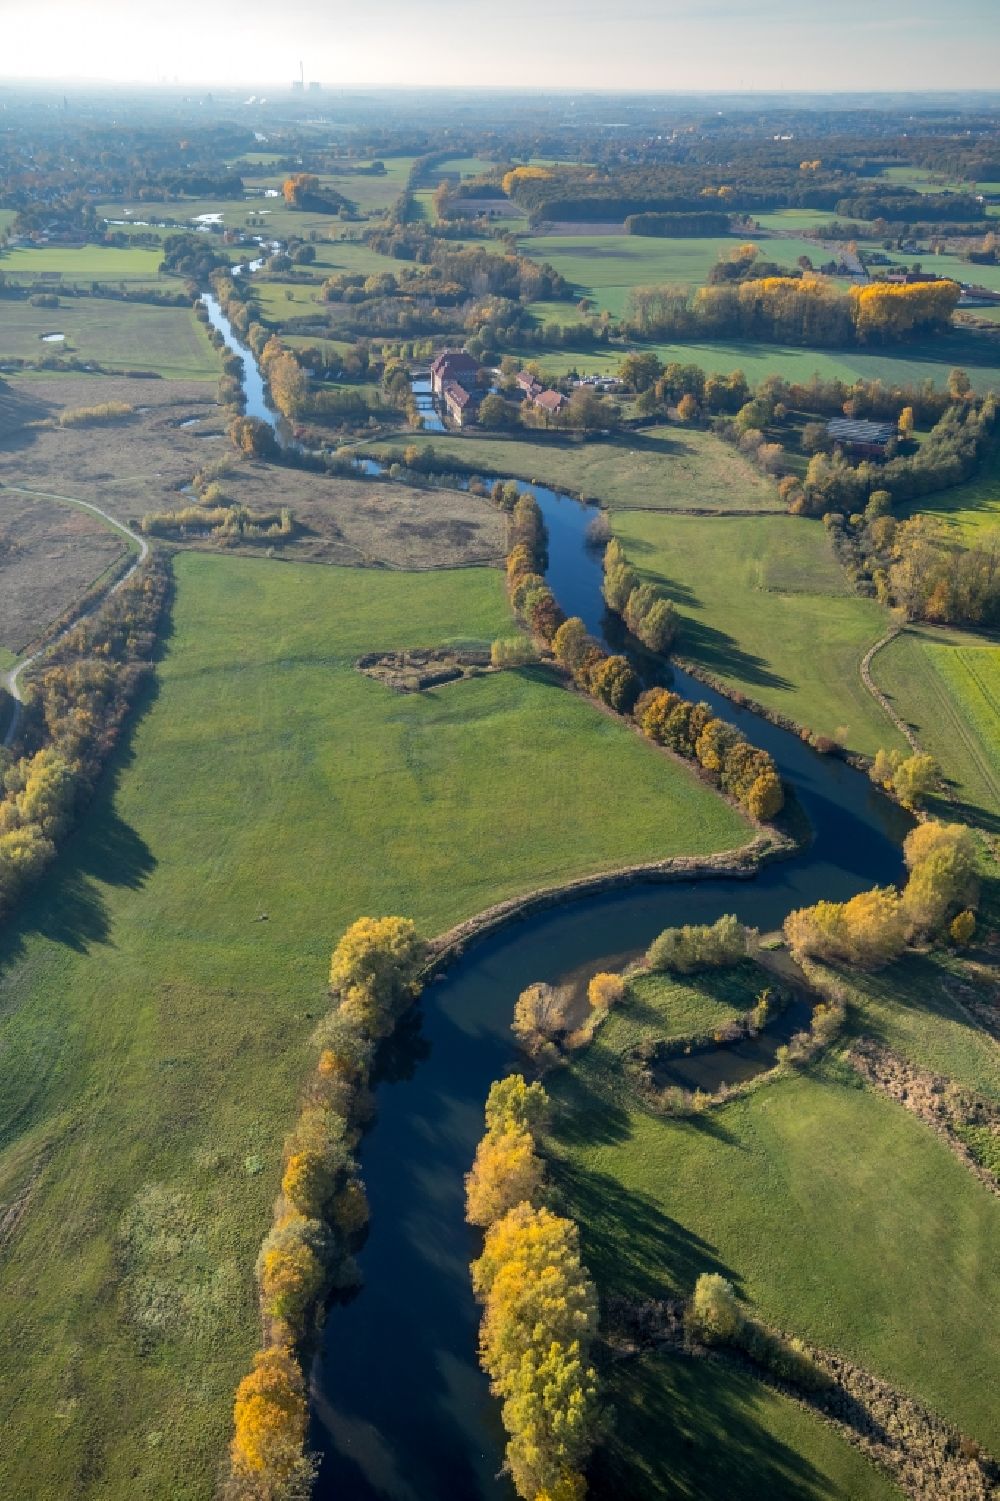 Aerial image Dolberg - Grassland structures of a meadow and field landscape in the lowland on river Lippe in Dolberg in the state North Rhine-Westphalia, Germany